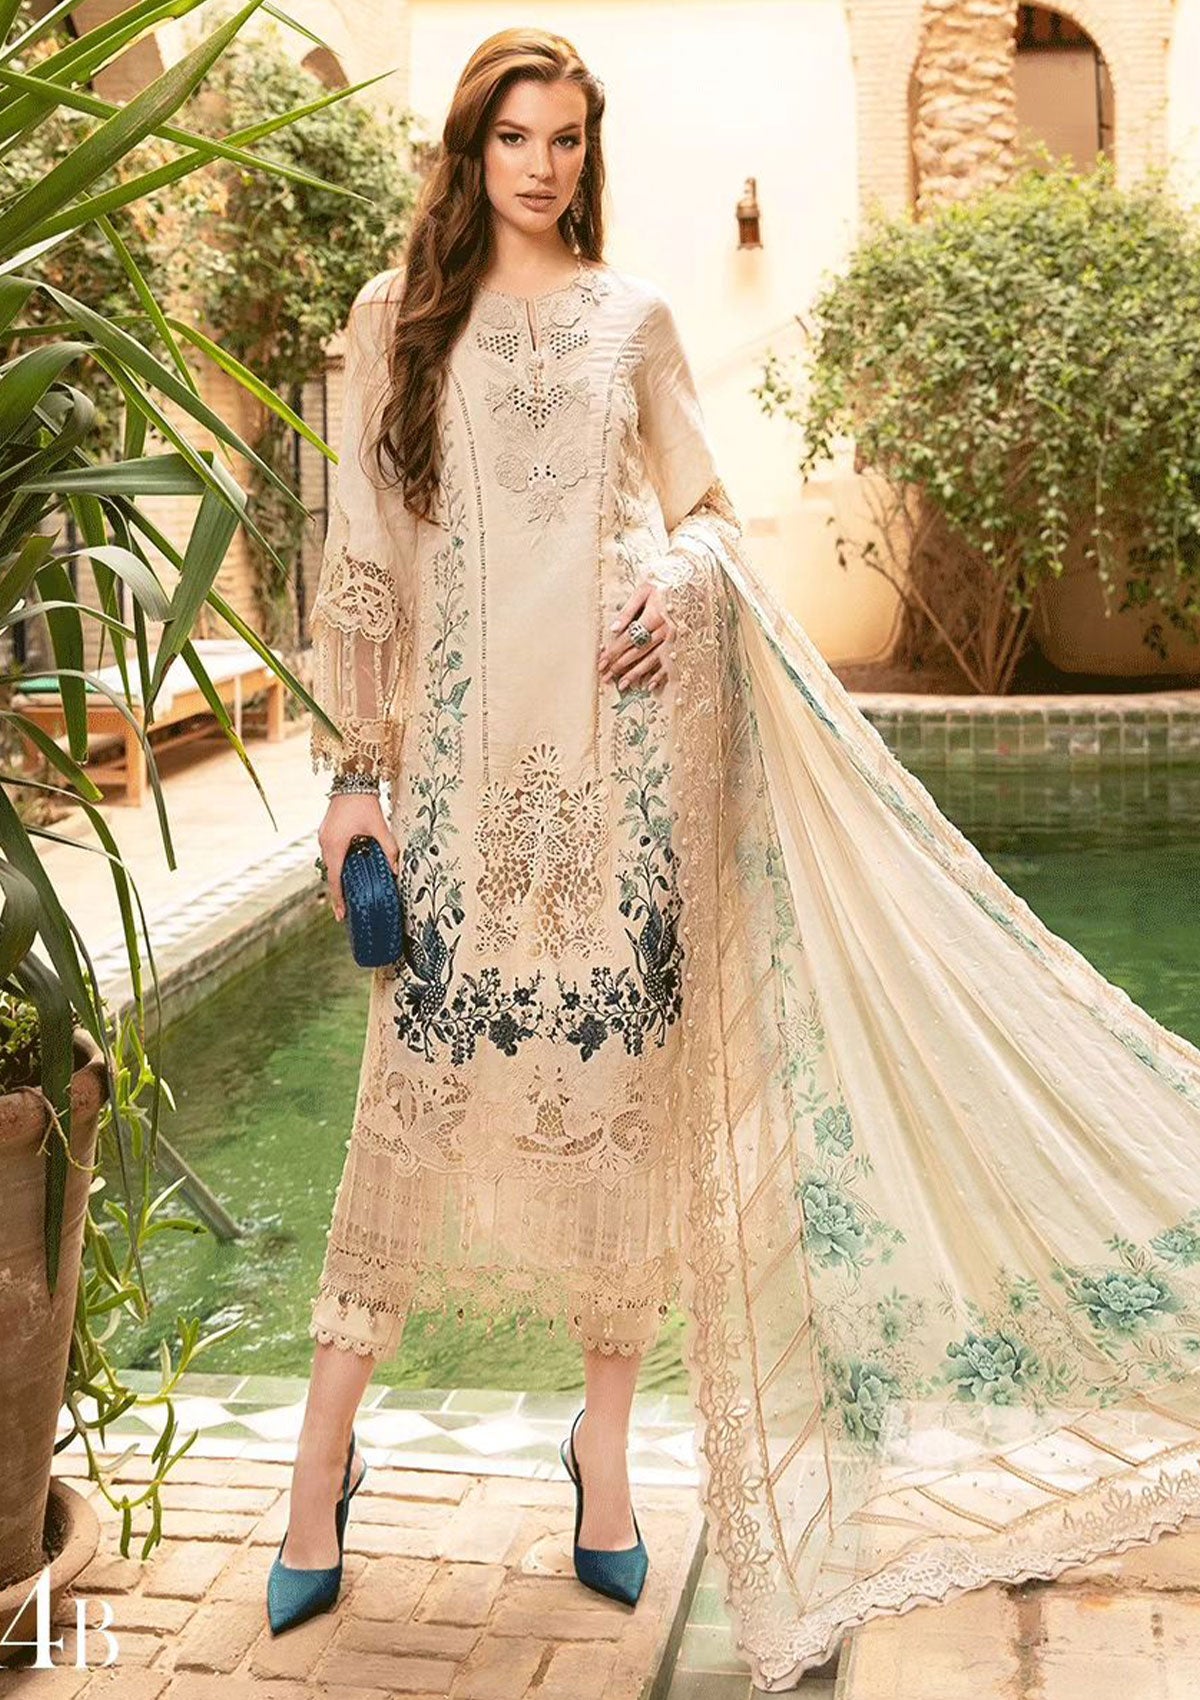 Lawn Collection - Maria B - Voyage a'Luxe - Luxury - MB24#14B